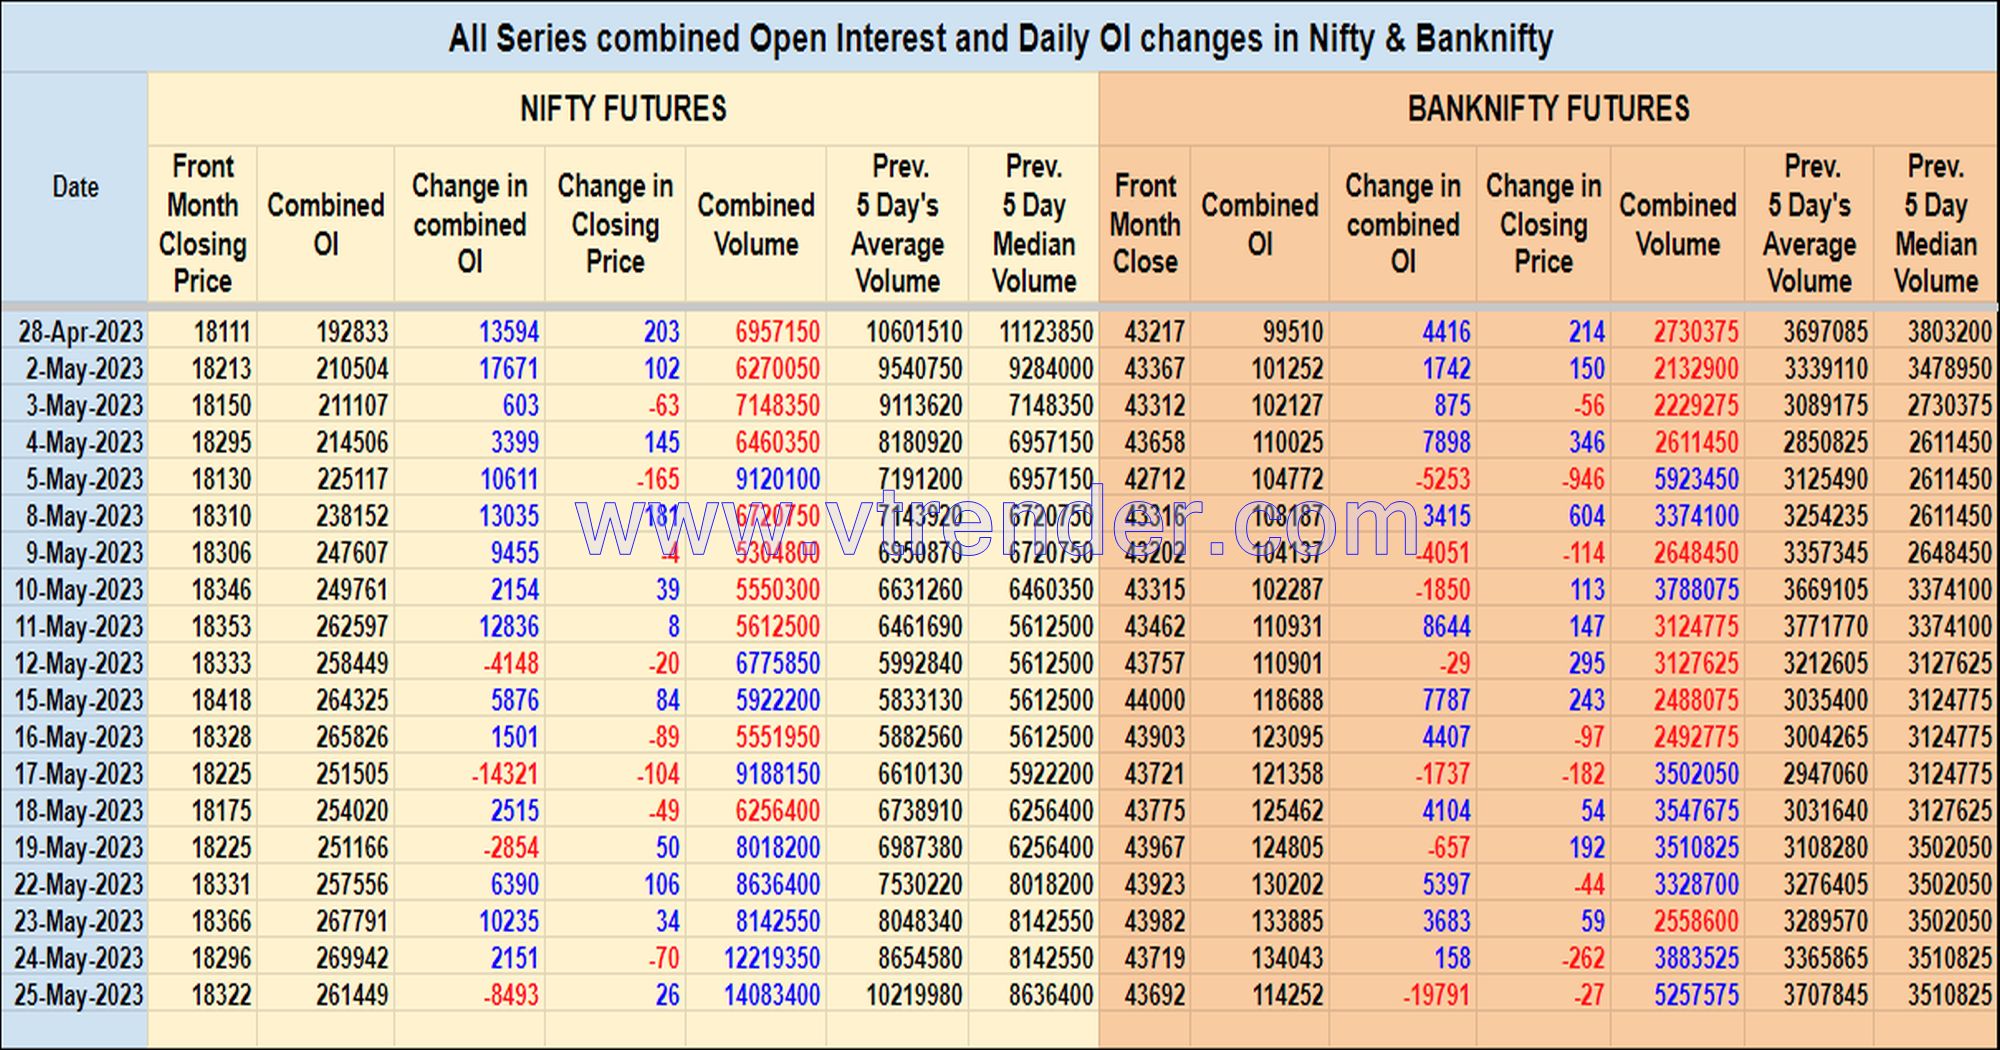 Oi25May Nifty And Banknifty Futures With All Series Combined Open Interest – 25Th May 2023 Banknifty, Nifty, Open Interest